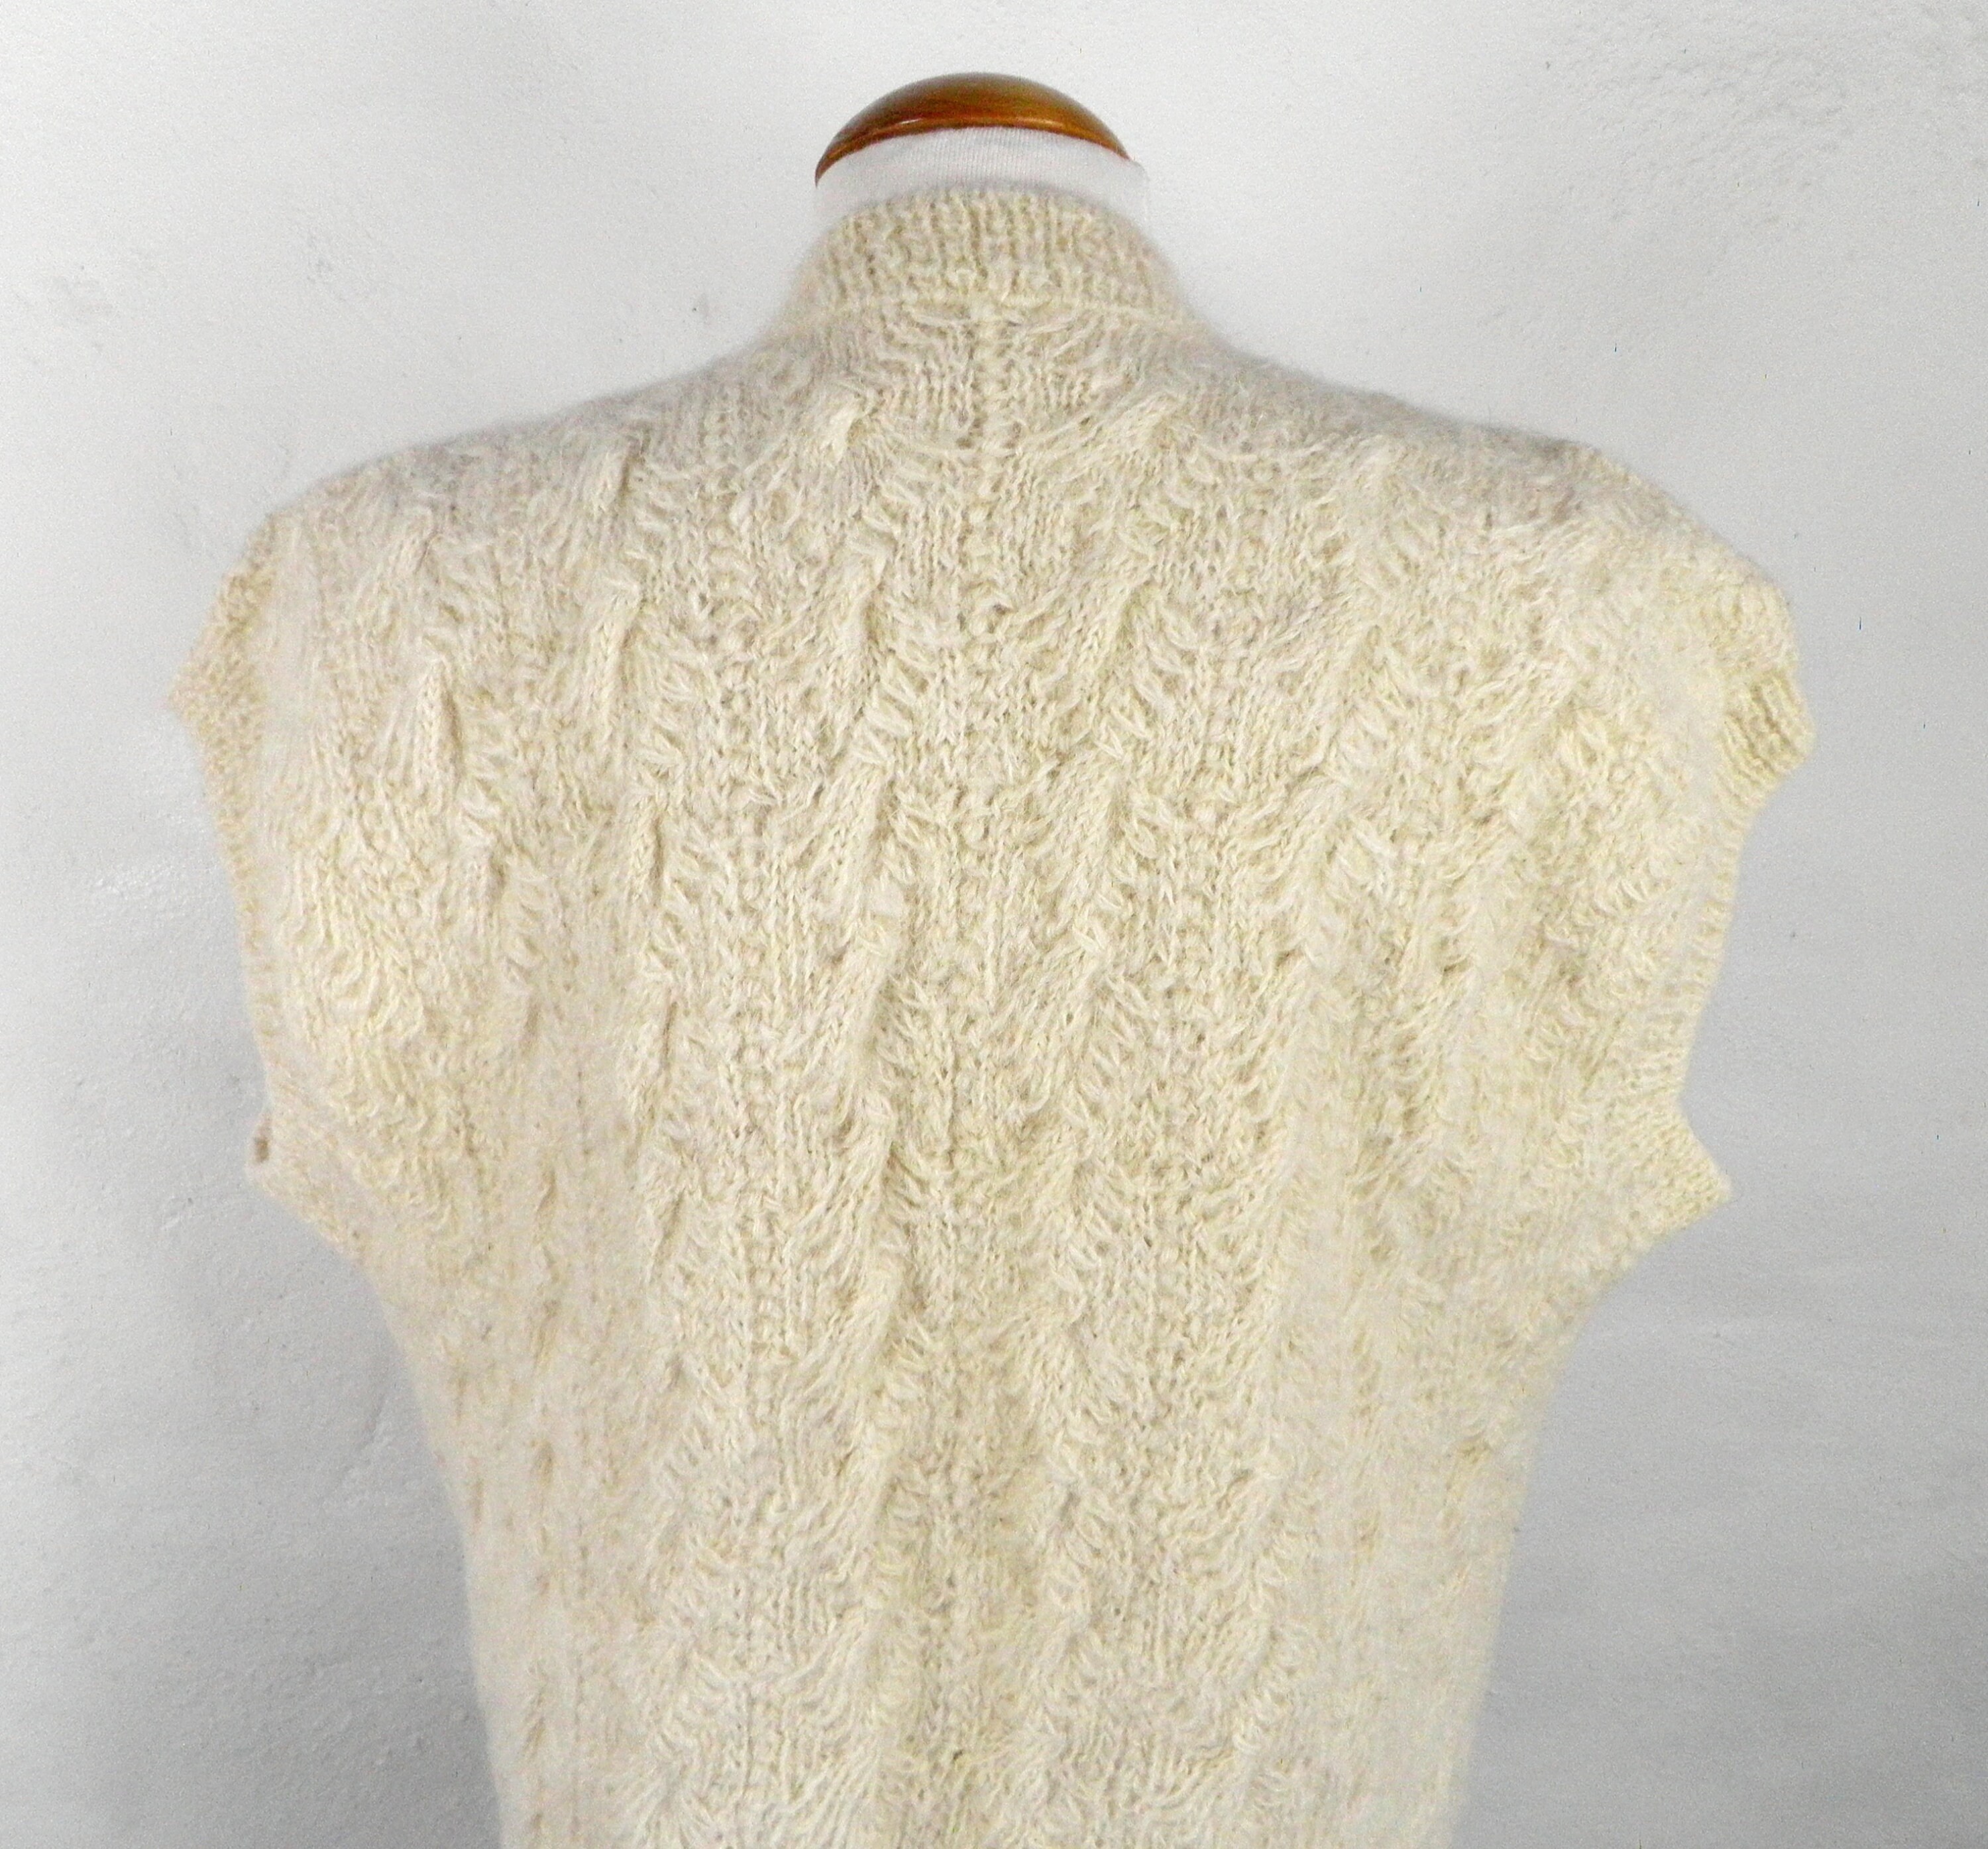 1980s Natural Cream Hand Knit Cable Knit Sleeveless Open Wool | Etsy